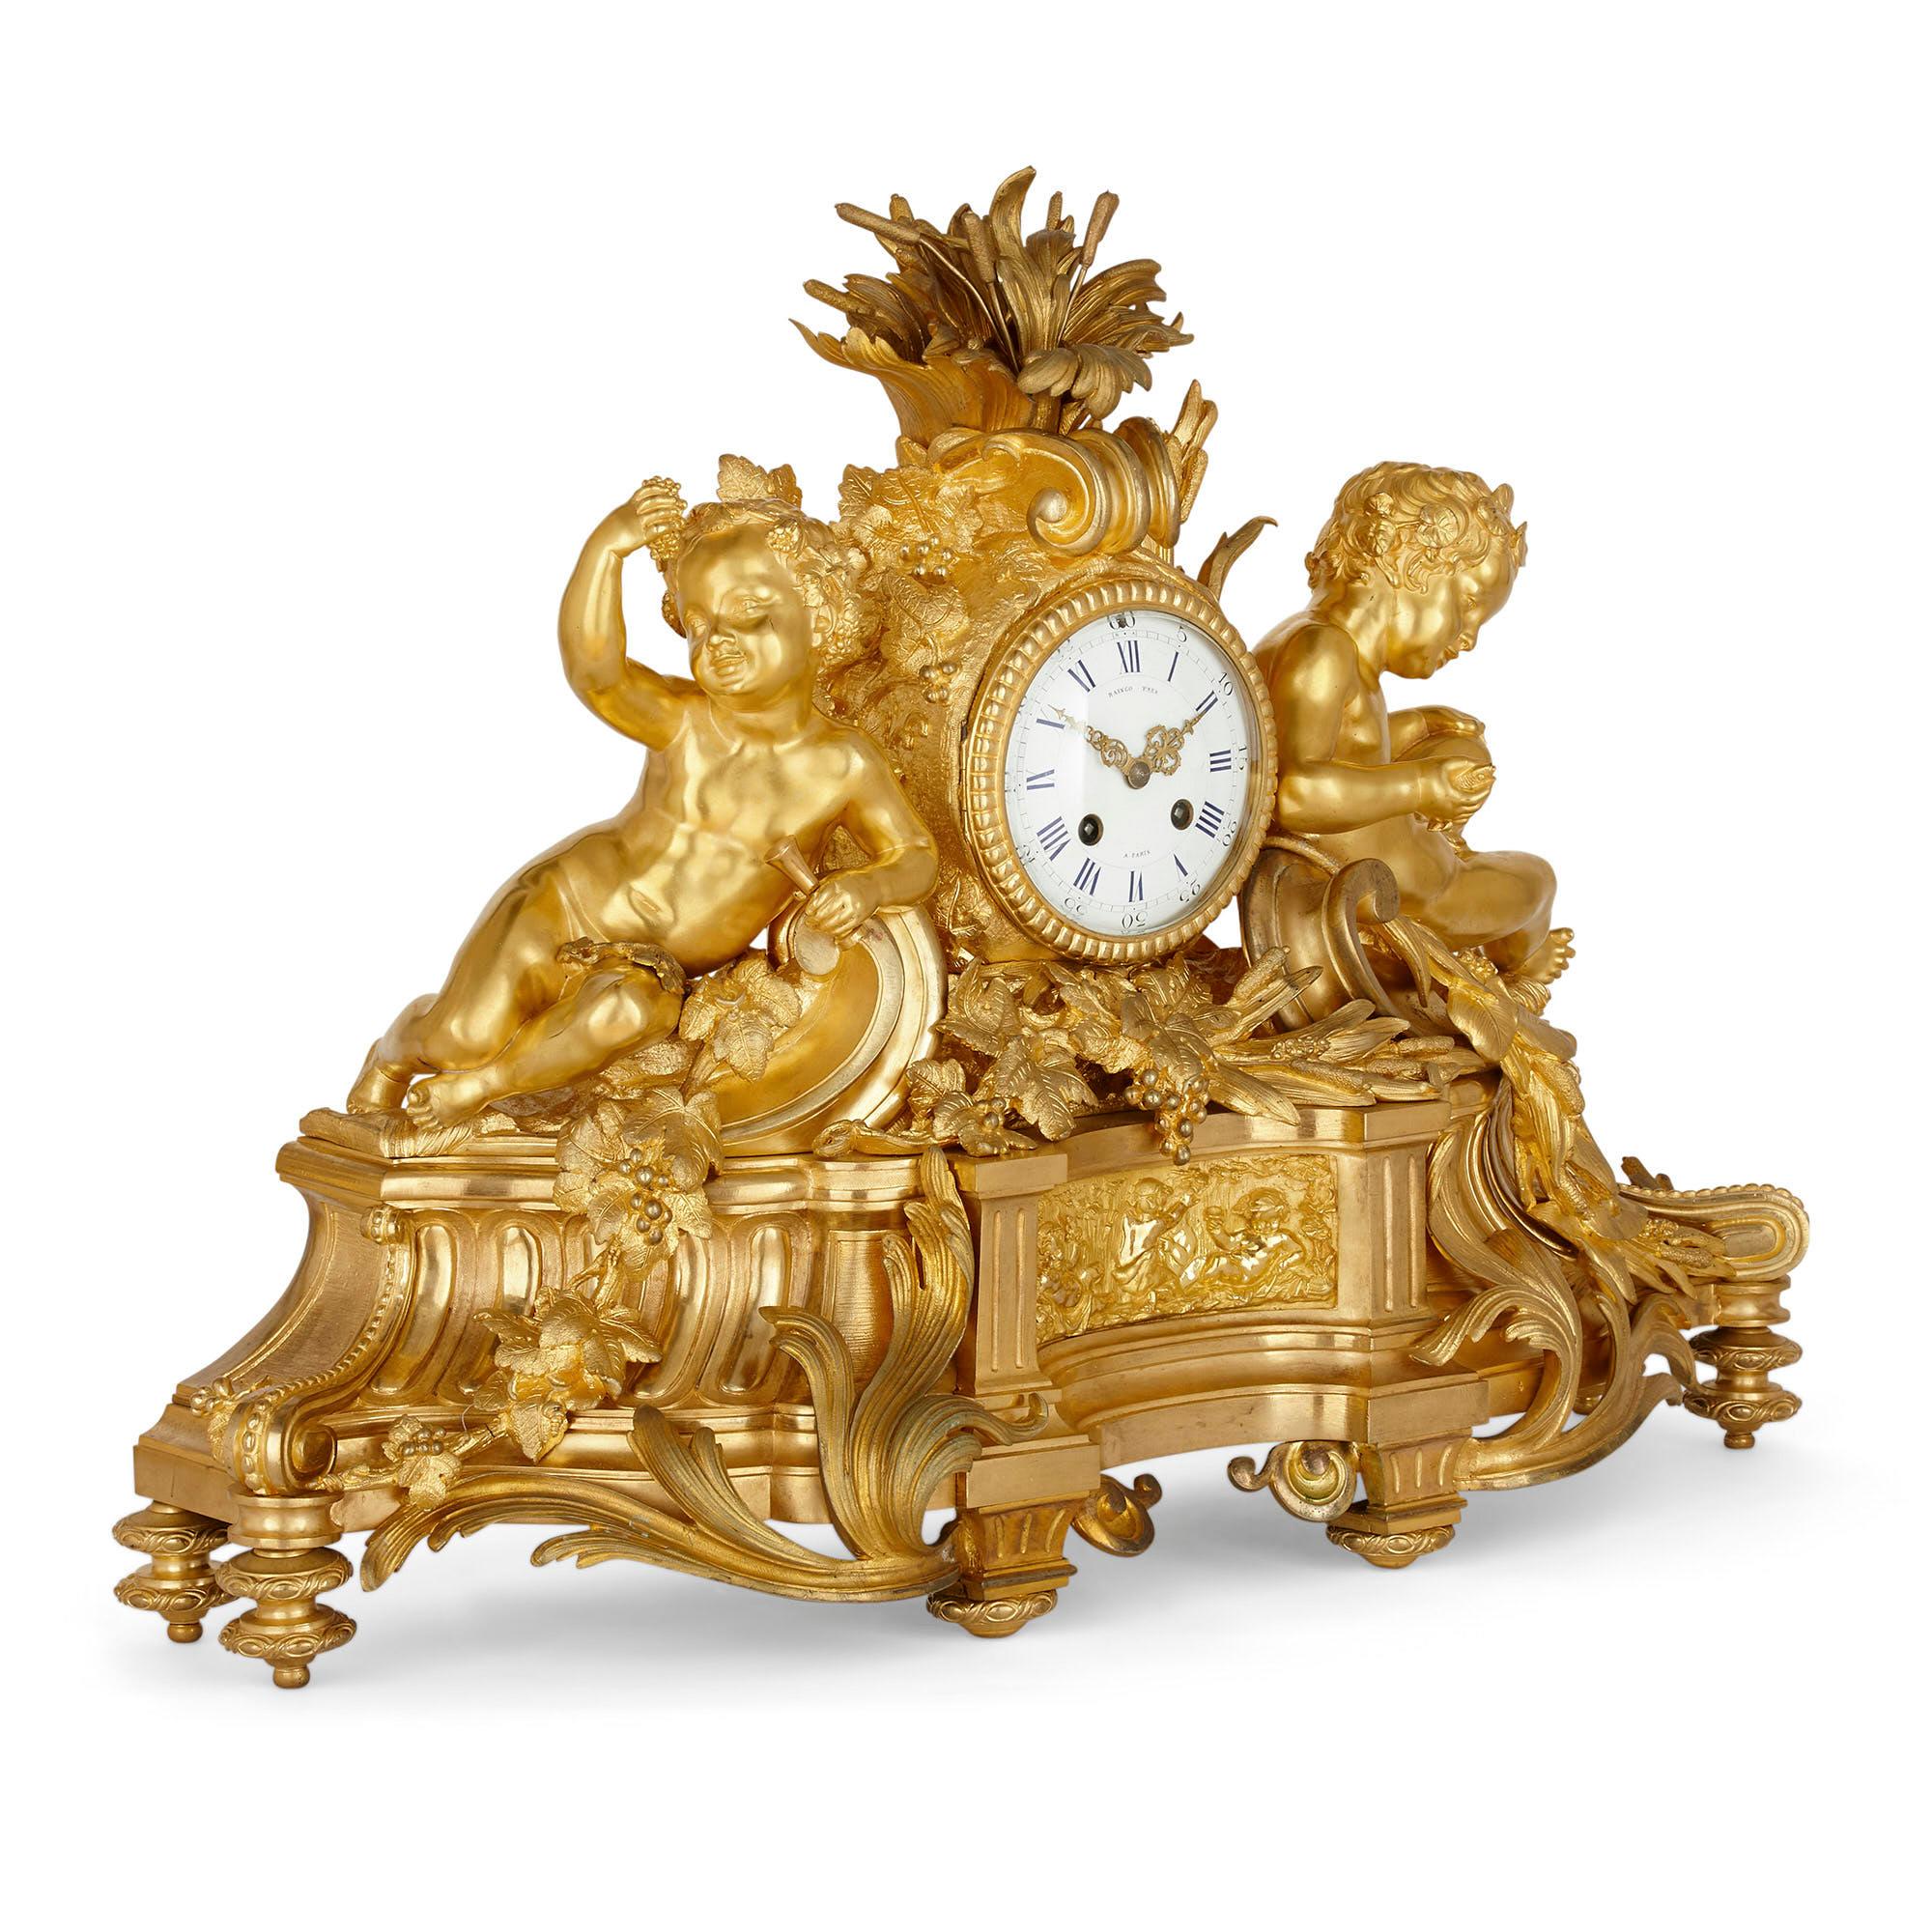 Gilt bronze three-piece clock set by Raingo Frères and Henri Picard

This exceptional 19th century clock set comprises of three pieces crafted from gilt bronze: a central mantel clock flanked by a pair of candelabra in the Rococo style.
 
The